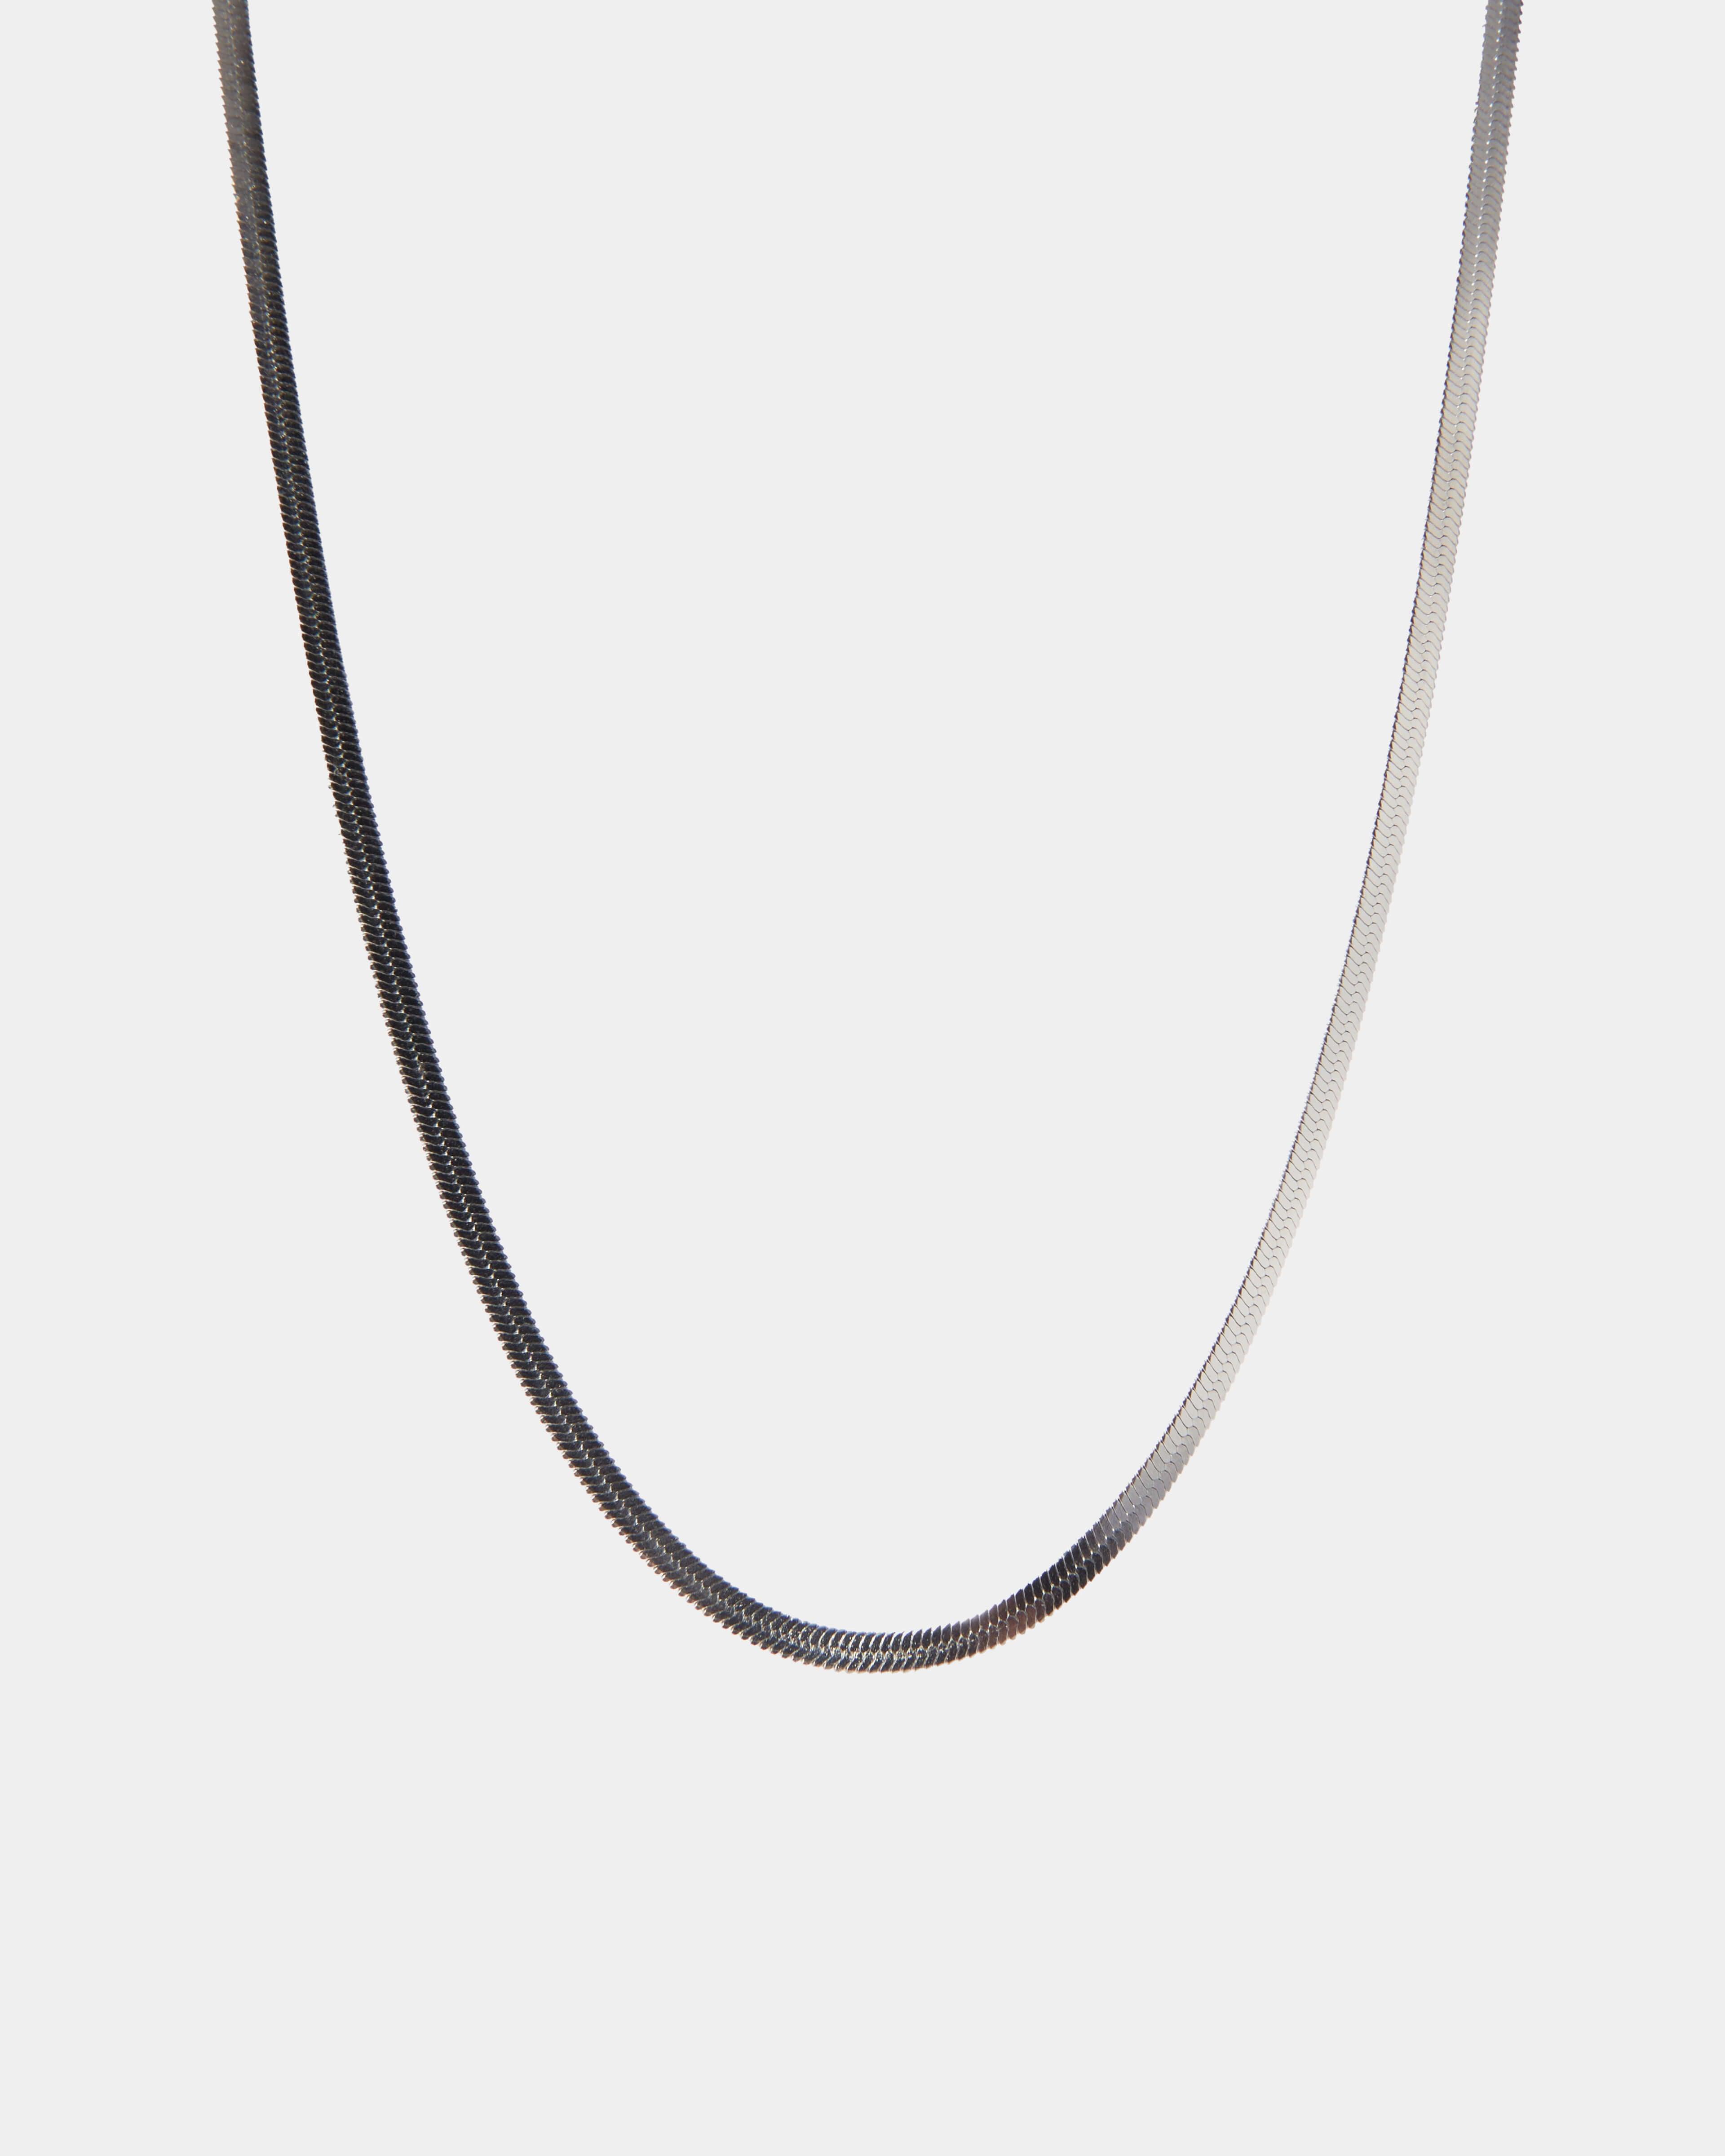 HISS & TWIST CHOKER - THE LIMELY